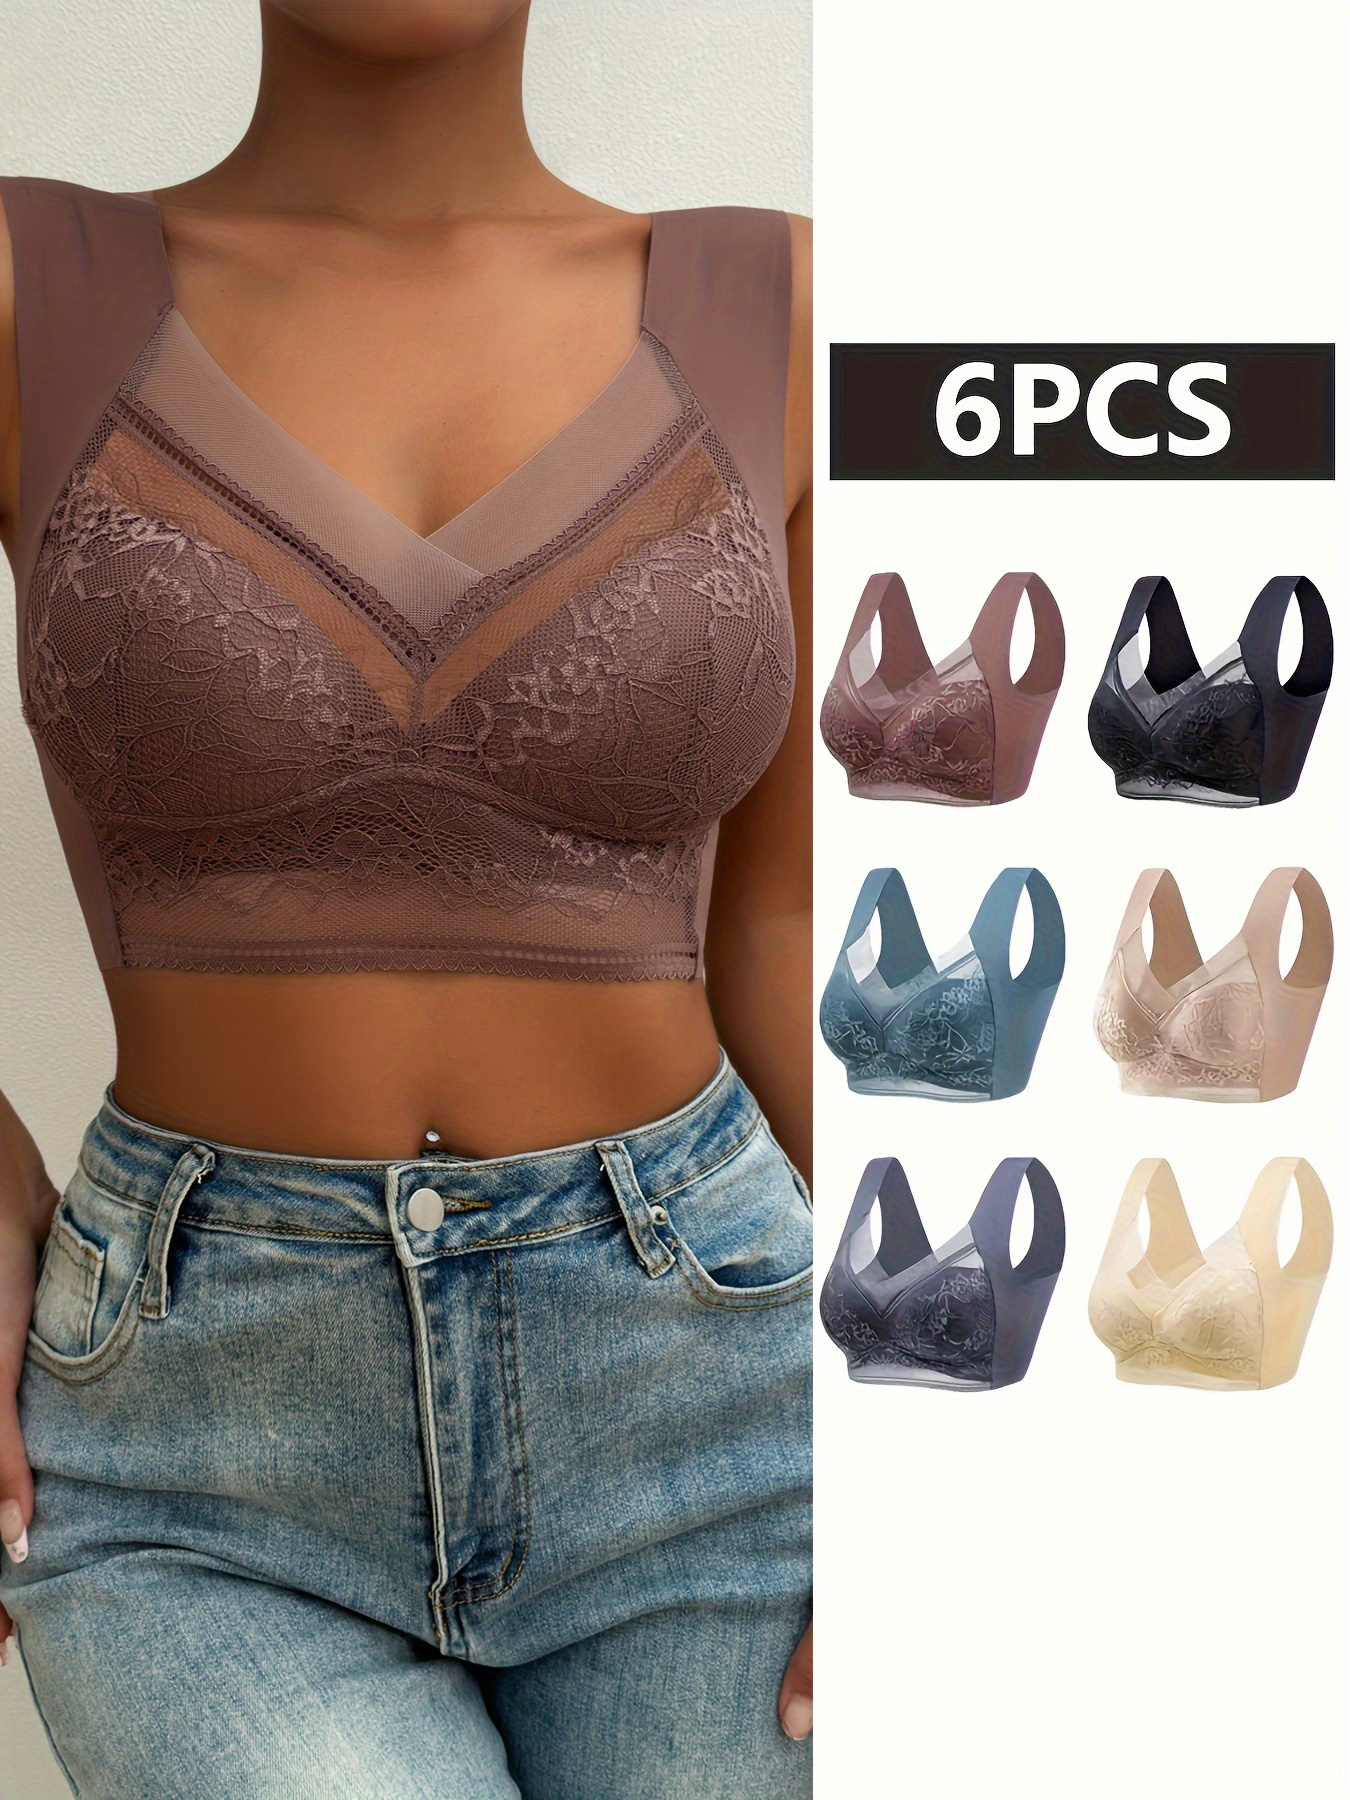 6pcs Sexy Contrast Lace Bra, Comfy & Breathable Solid Padded Wireless Bra,  Women's Lingerie & Underwear